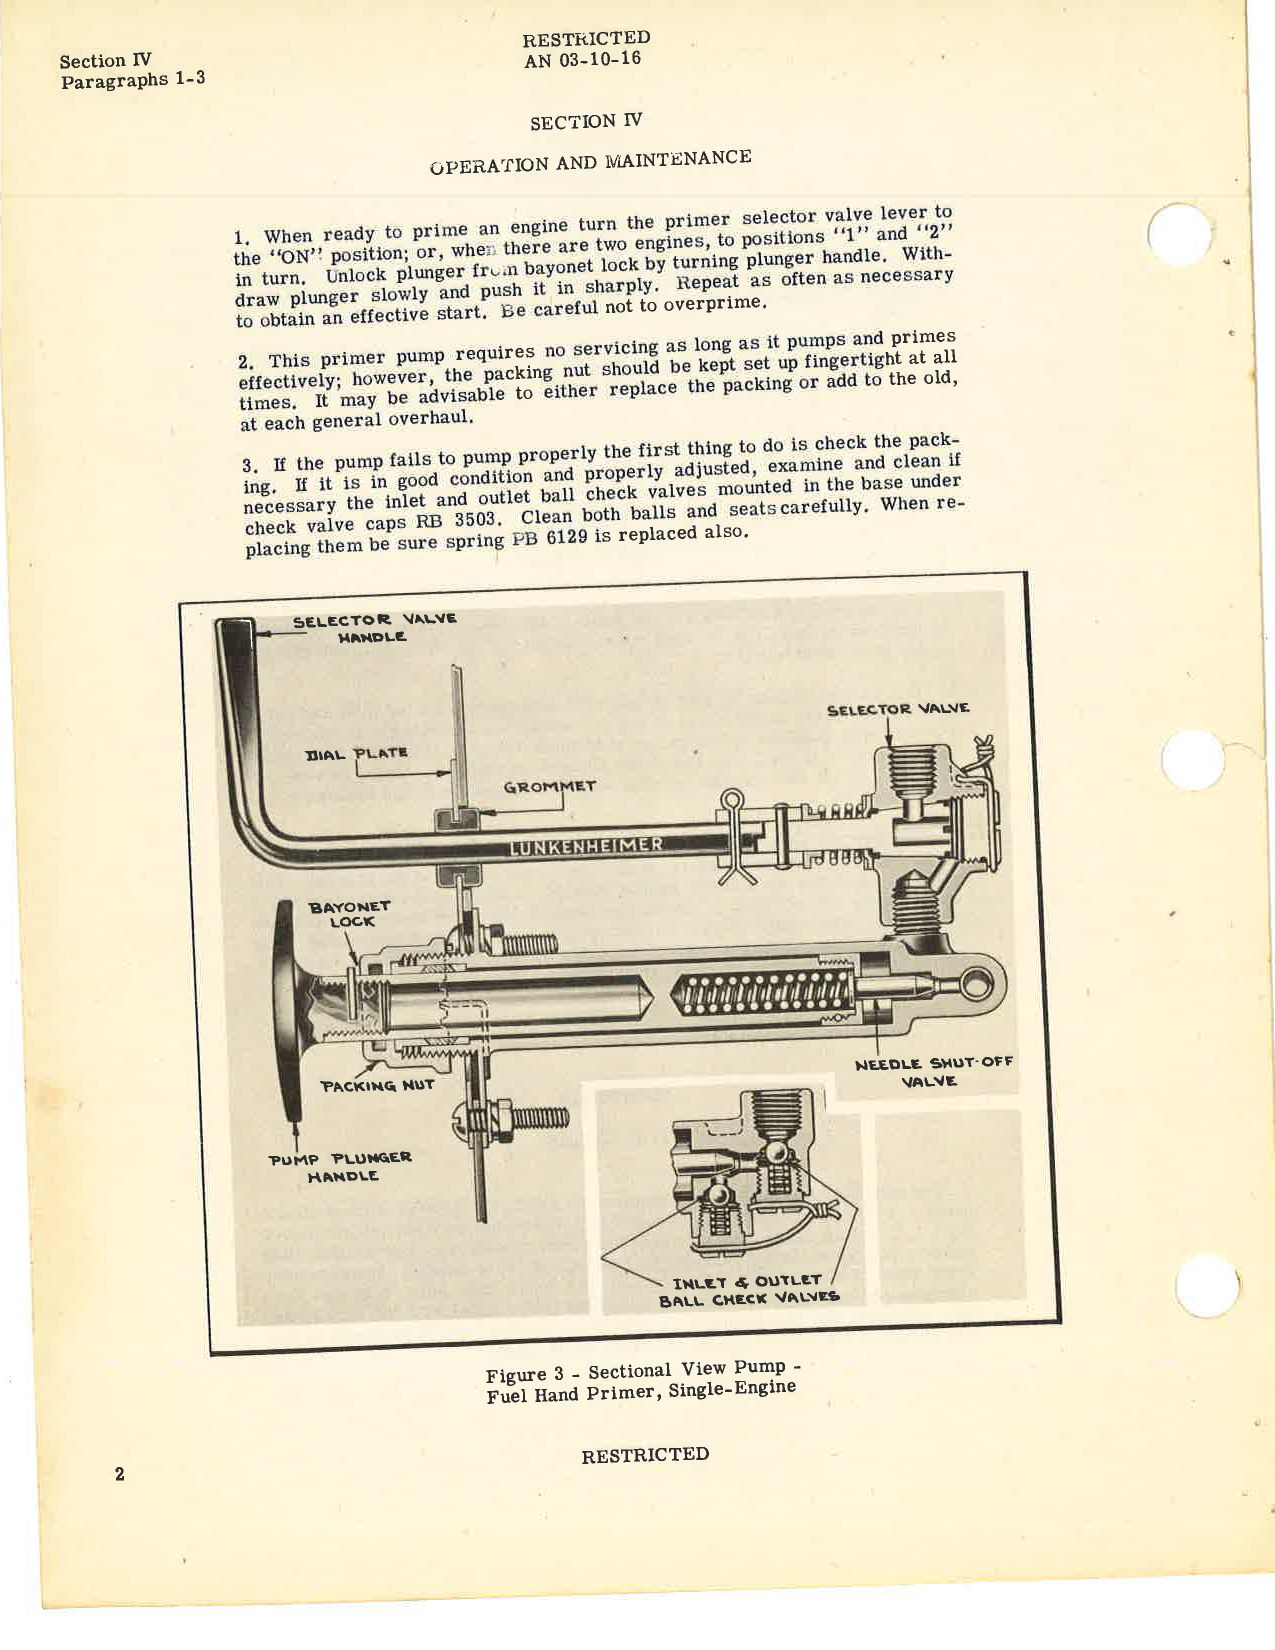 Sample page 8 from AirCorps Library document: Handbook of Instructions with Parts Catalog for Types E-6 and E-7 Hand Primer Fuel Pumps